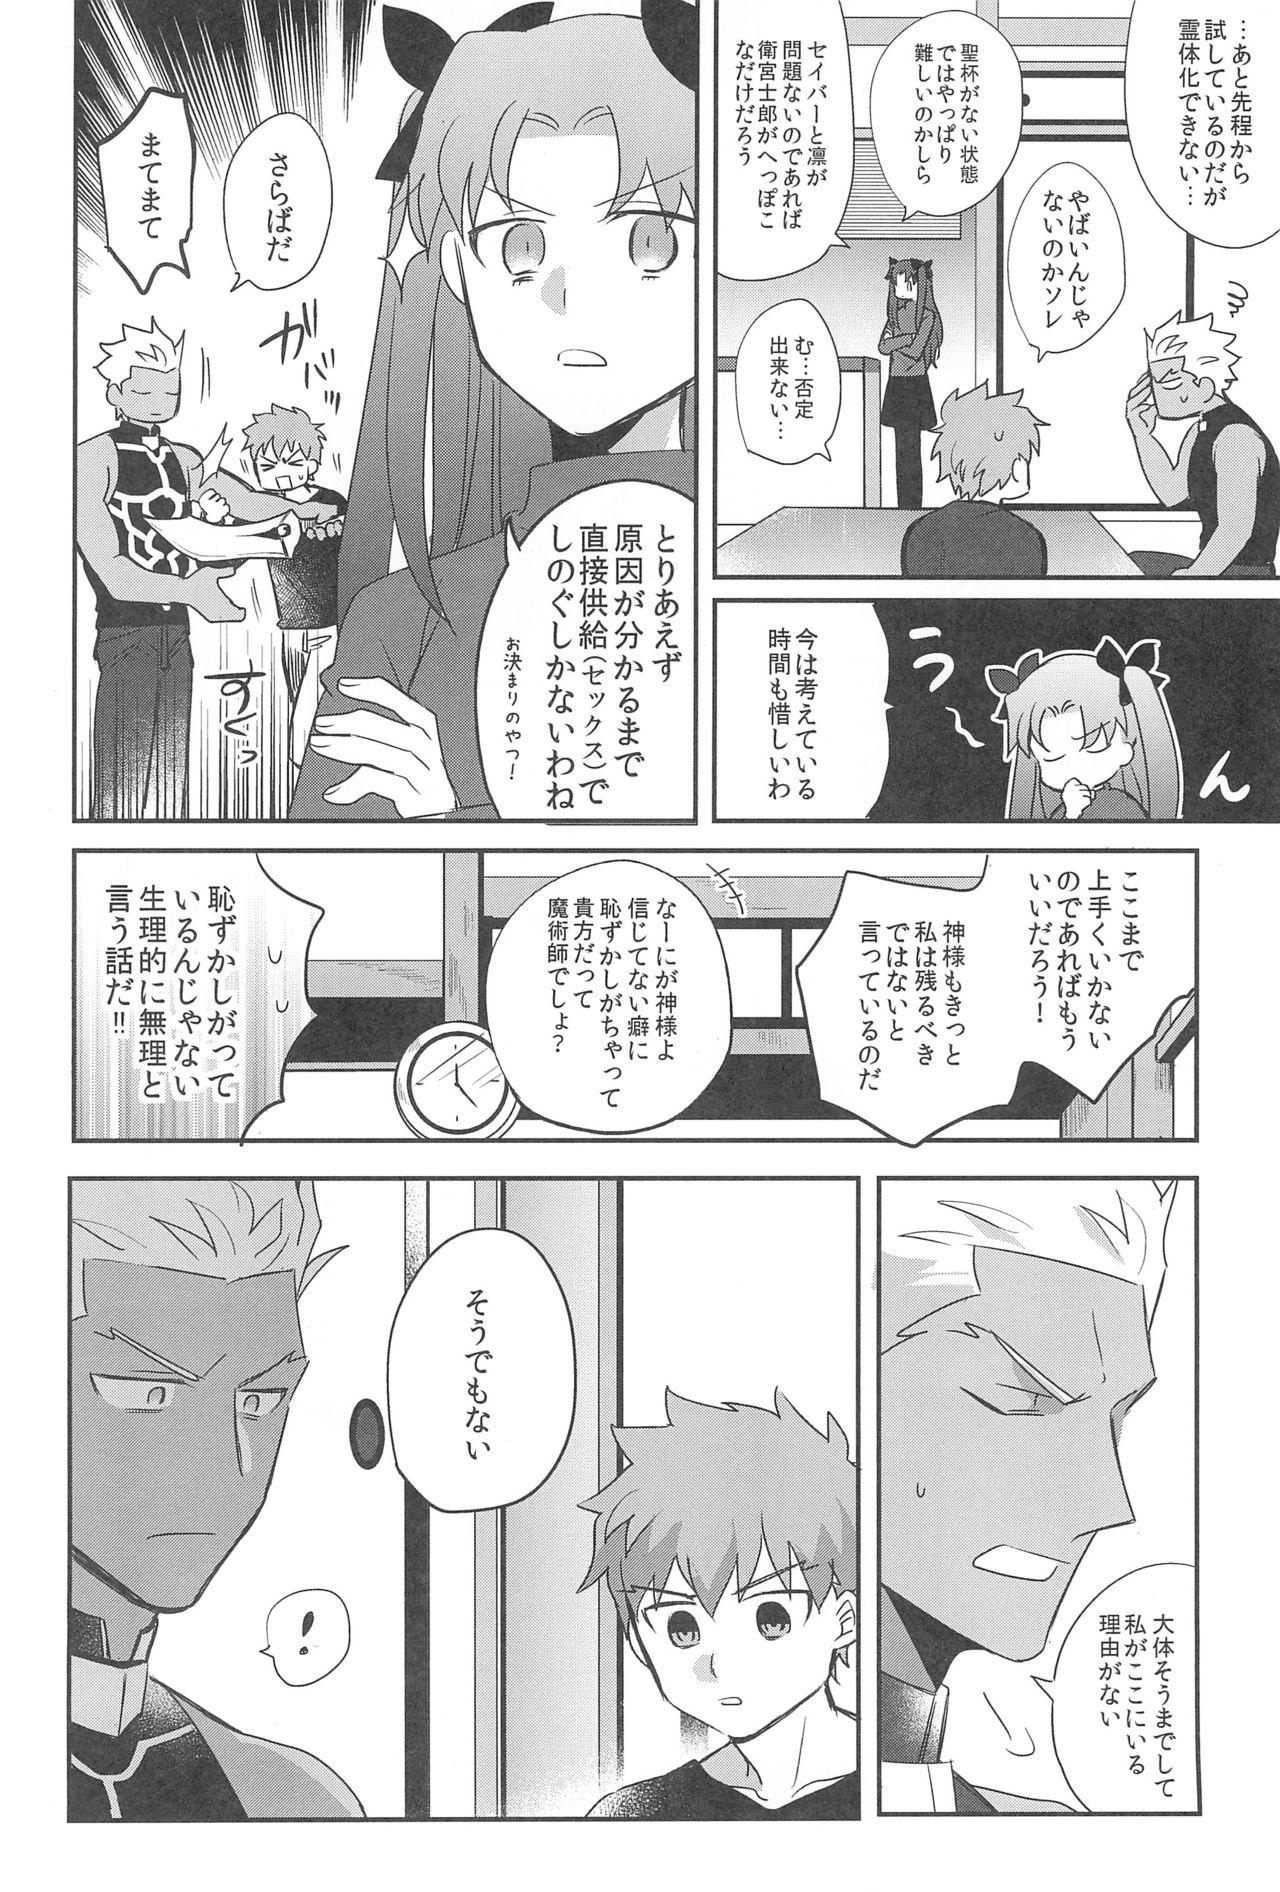 Gemendo Honban NG! - Fate stay night Passion - Page 6